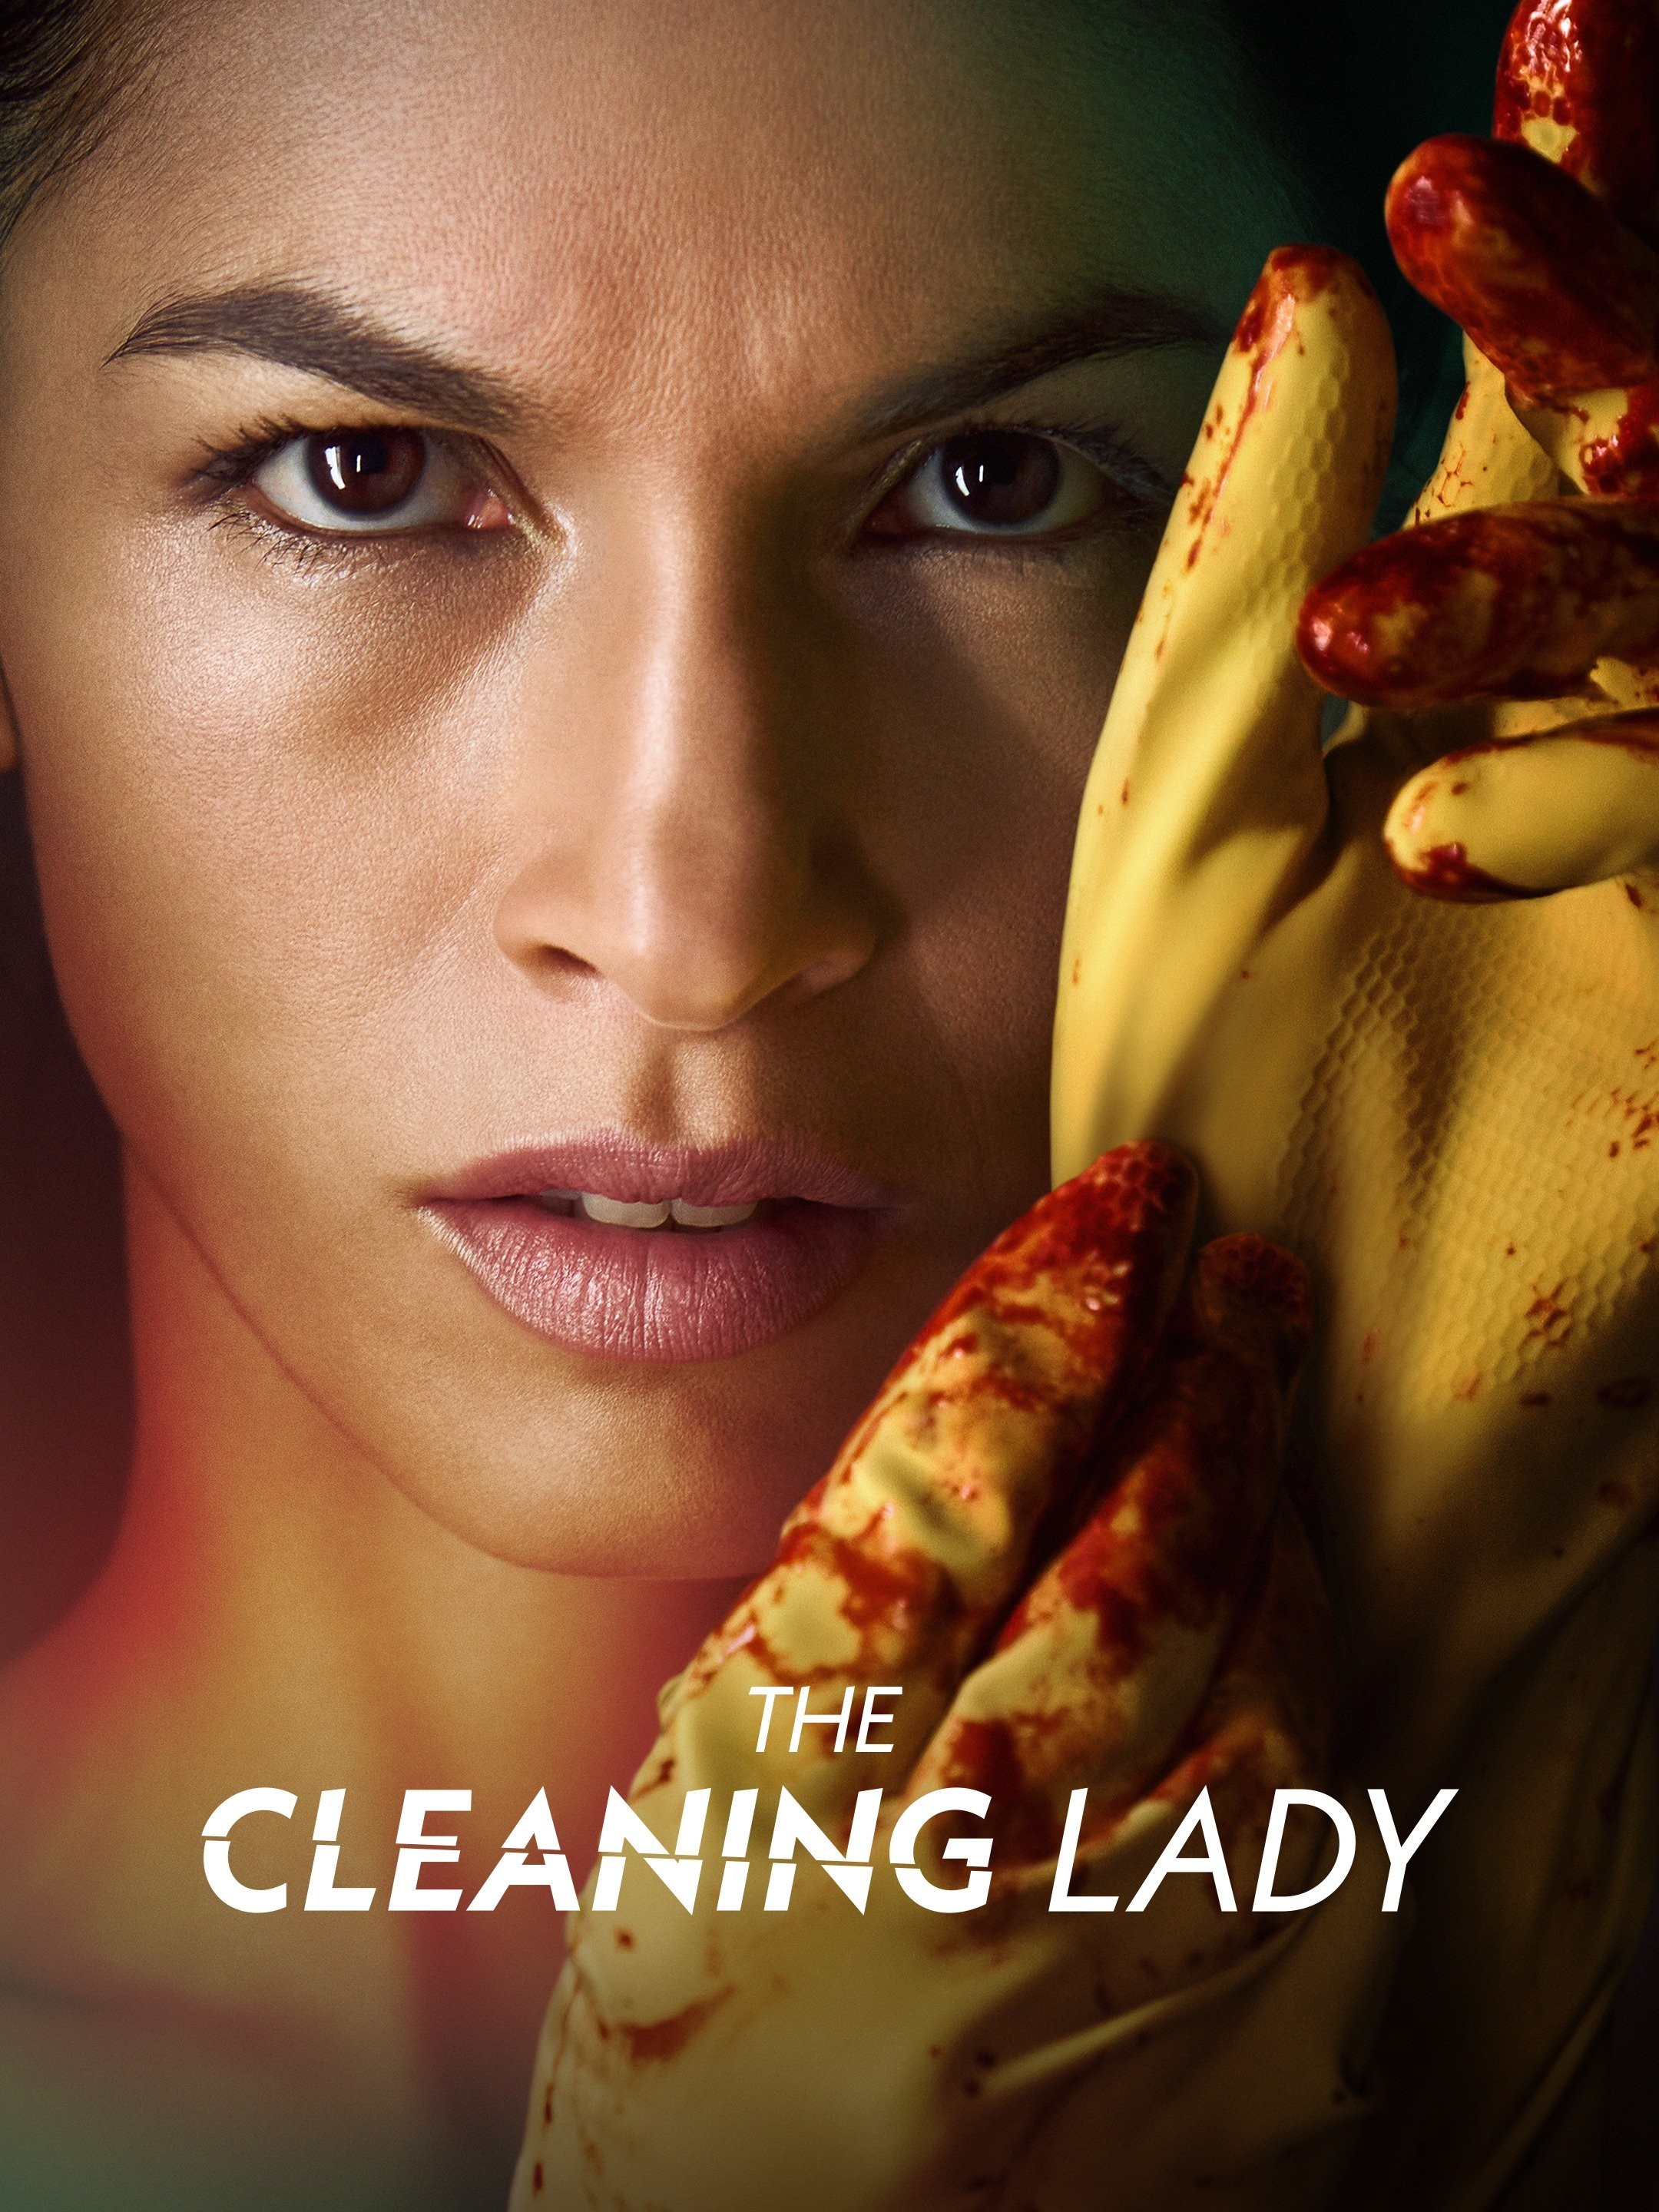 New Episode: The Cleaning Lady Season 3 Episode 8 (S03E08) - Know Thy Enemy